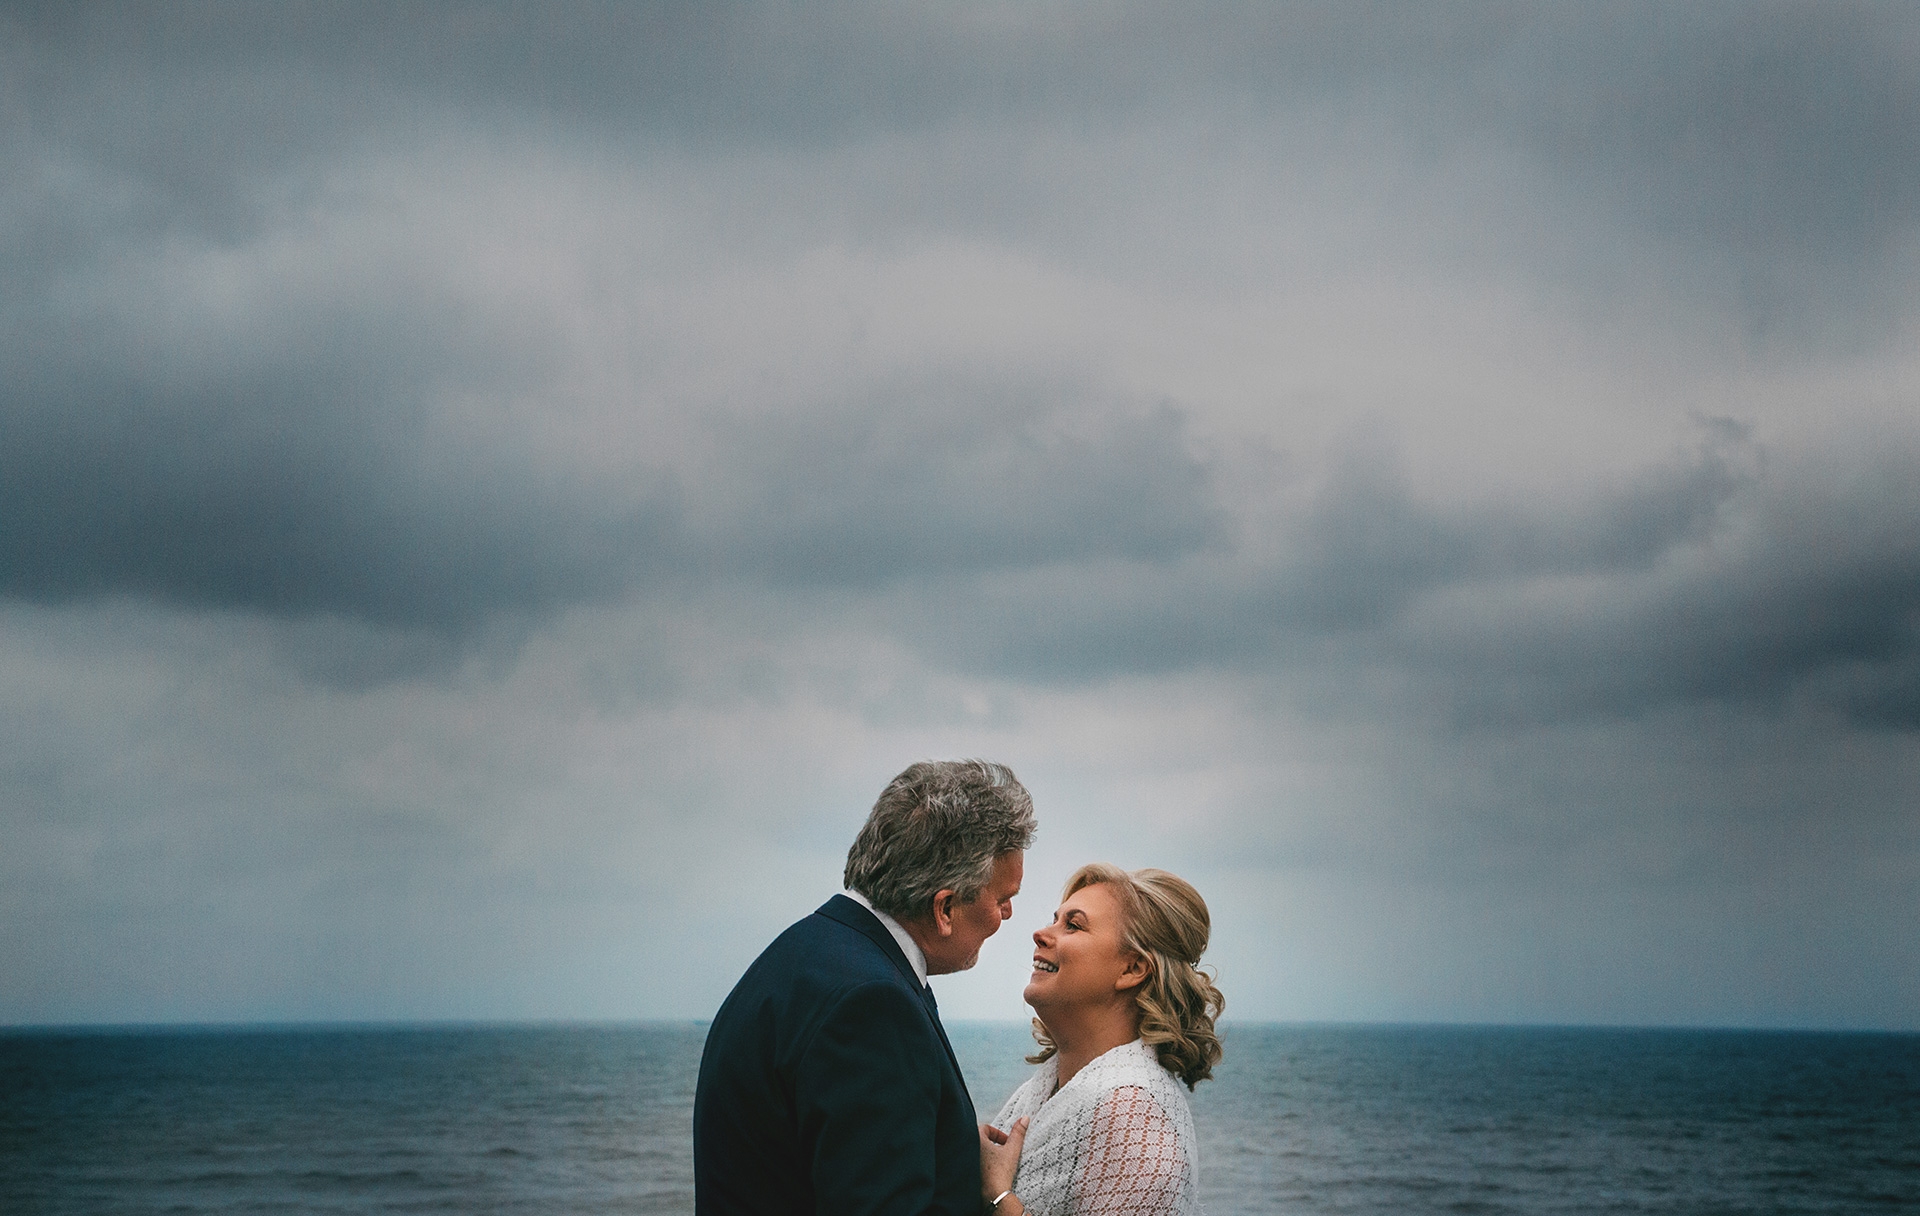  "Don't hesitate to book Esther to photograph your special occasion.. She sees things through her lens that are remarkable. A great talent and a very lovely person! Our wedding photographs are amazing and everyone I have shown any too have said they 